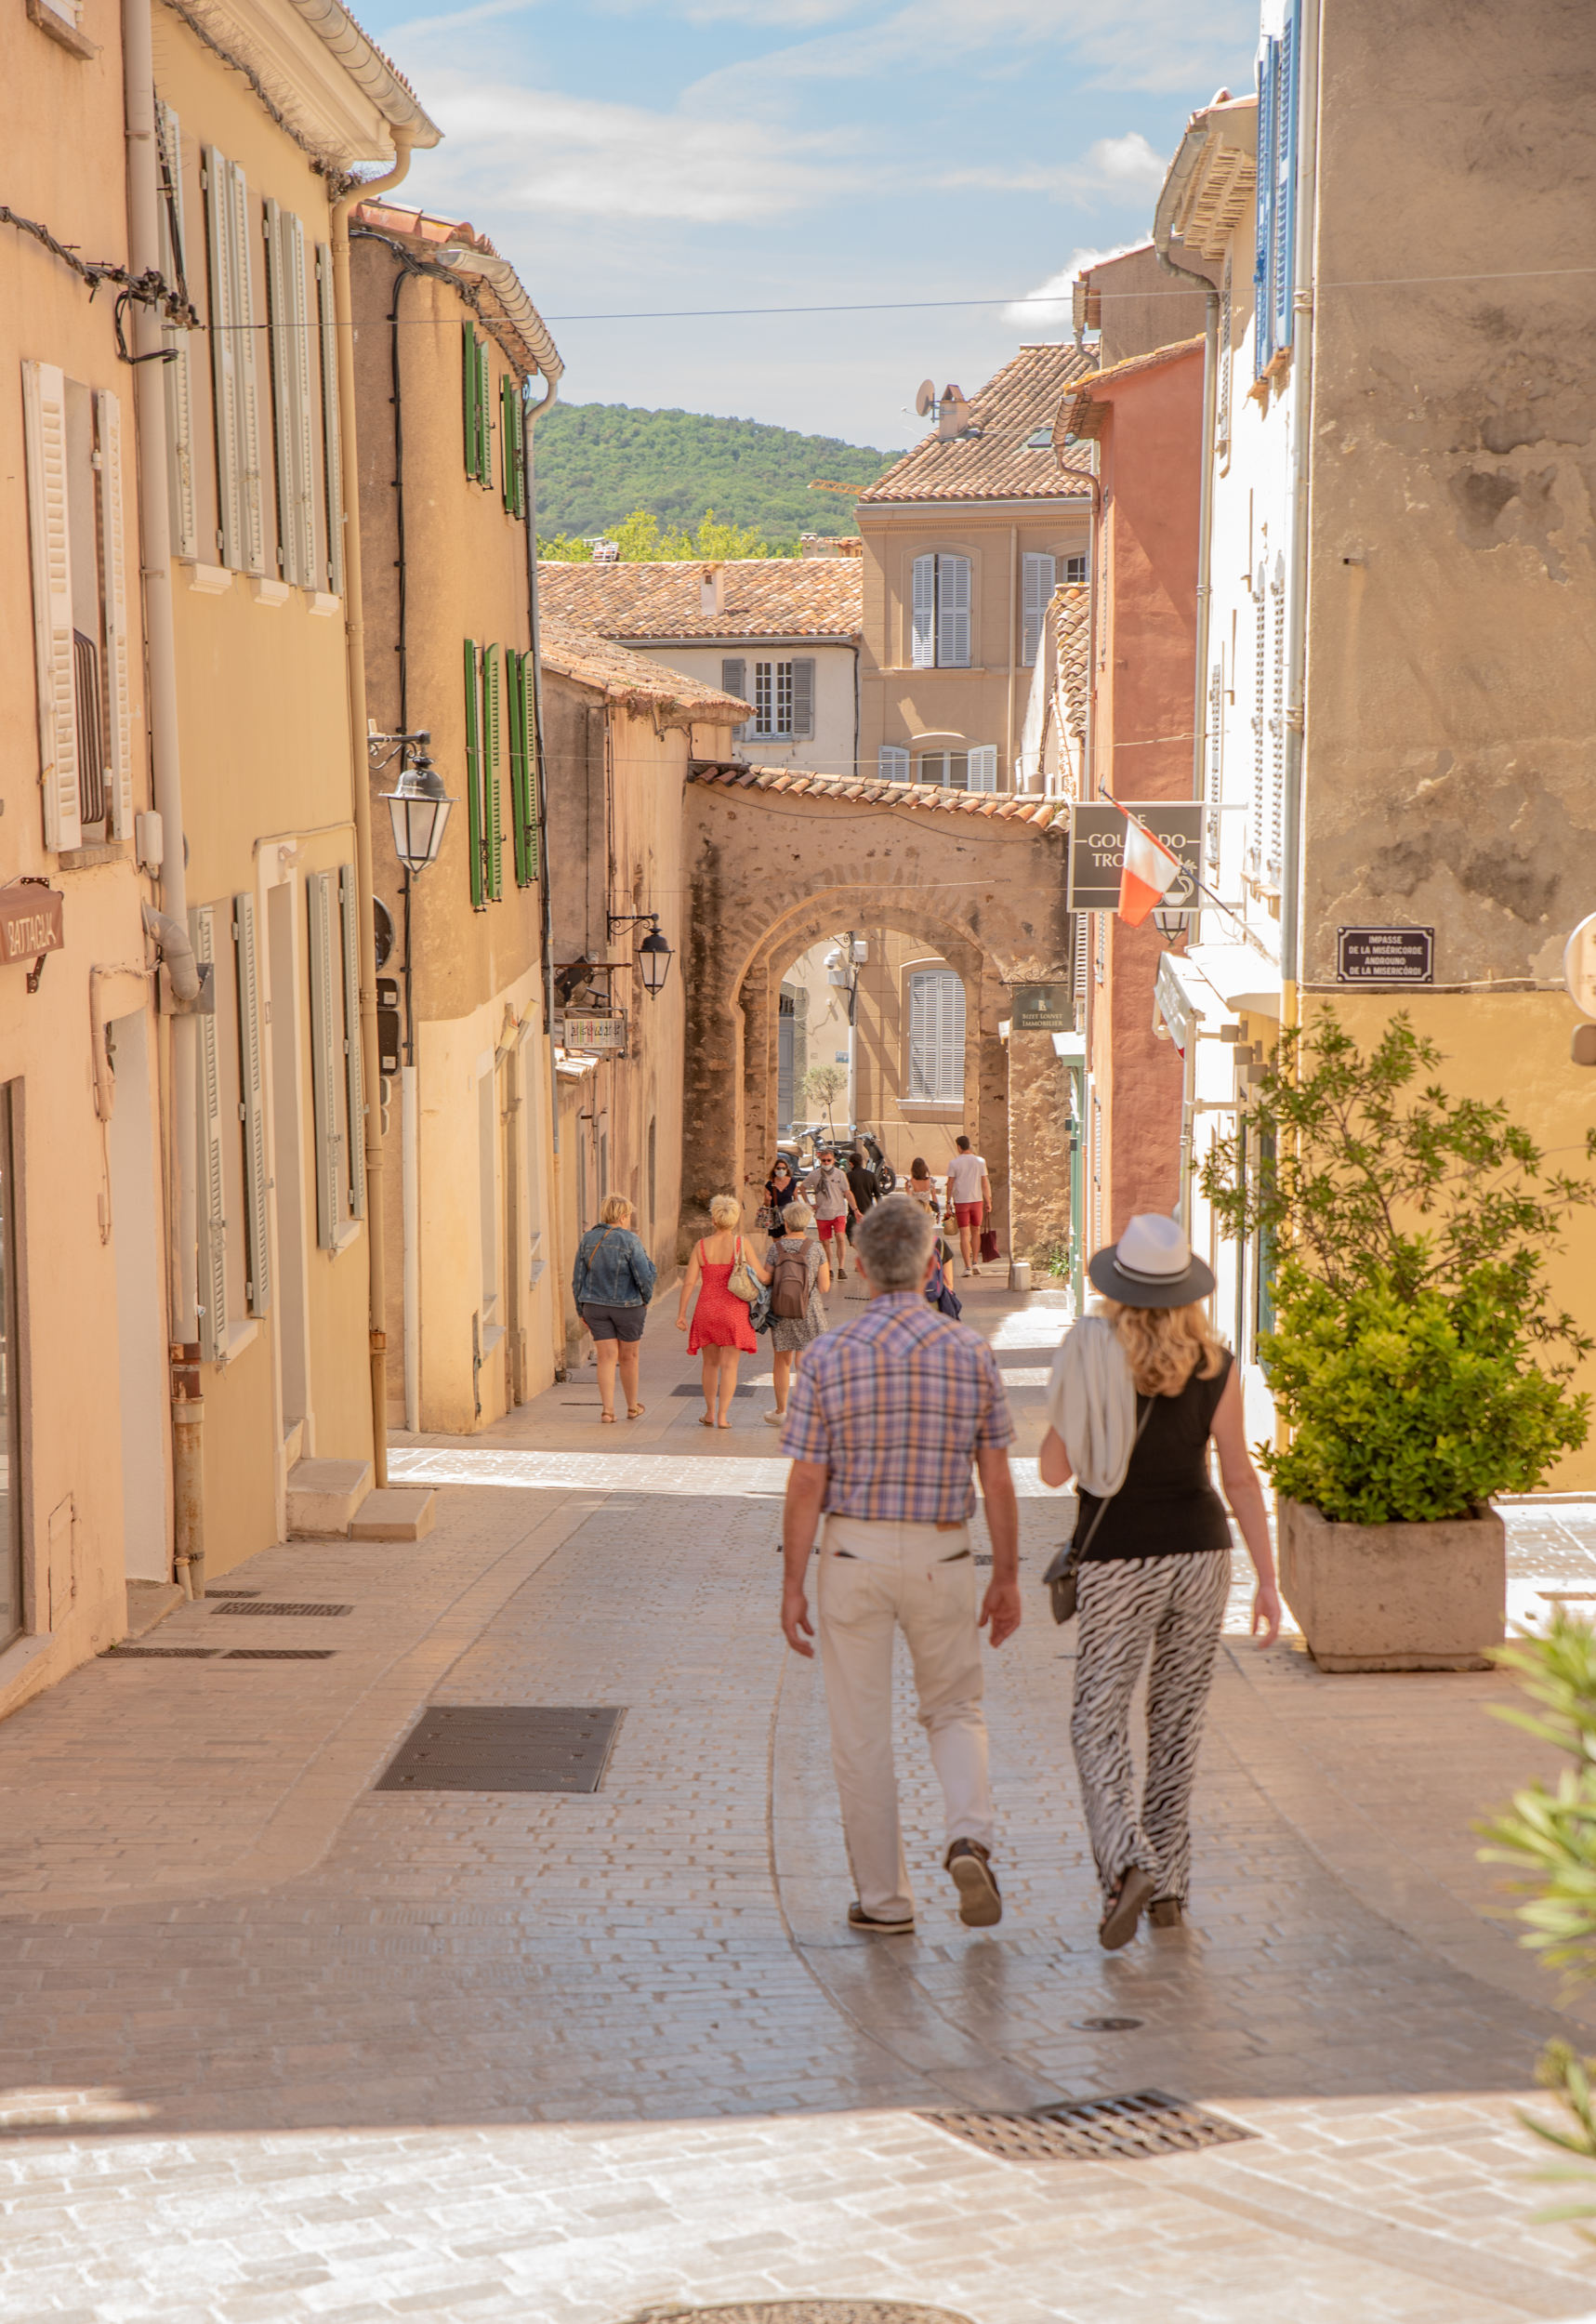 St. Tropez Travel Guide: Things To Do and Where To Stay